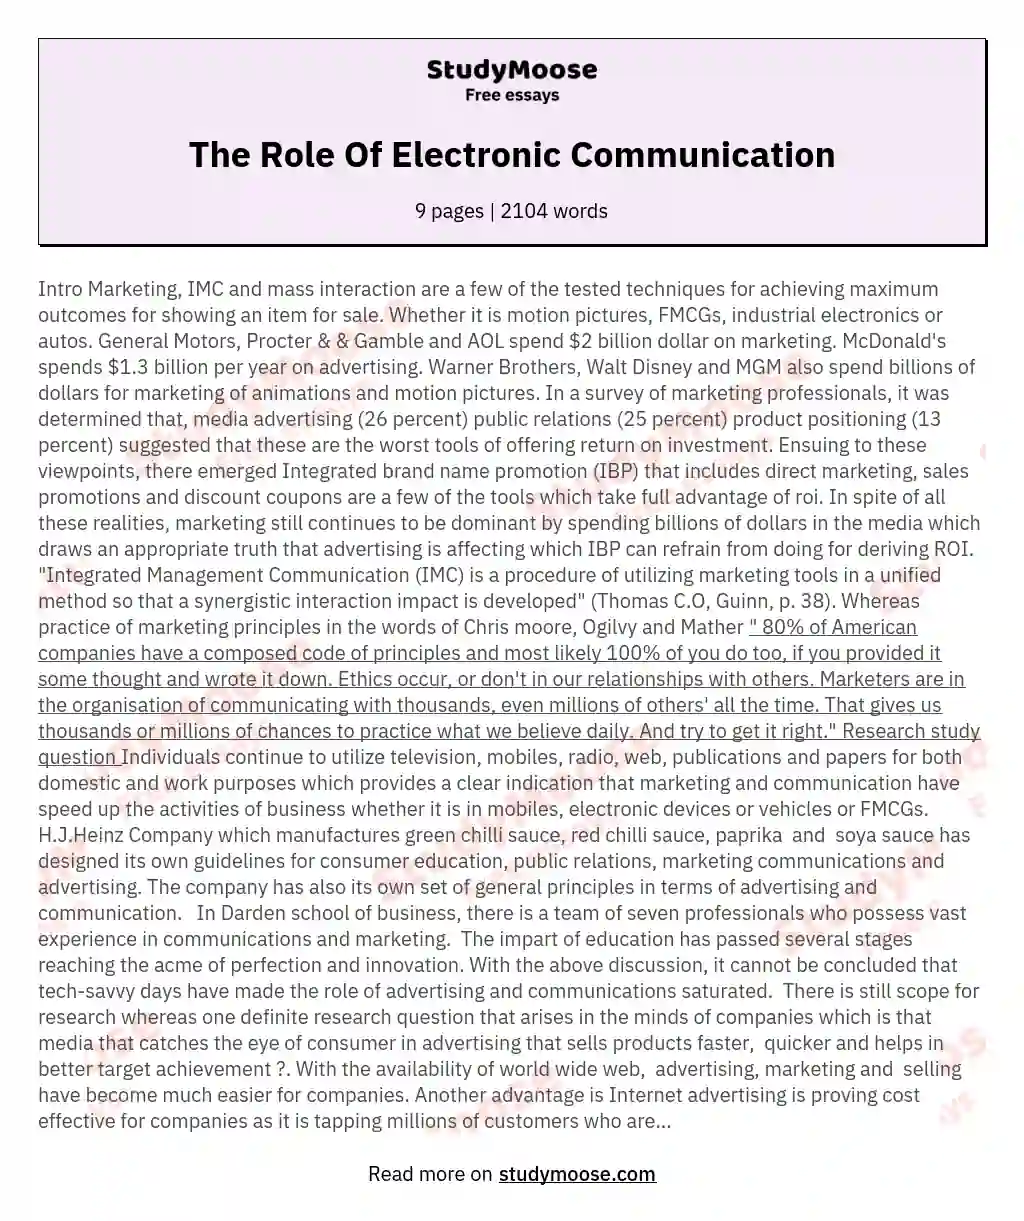 The Role Of Electronic Communication essay